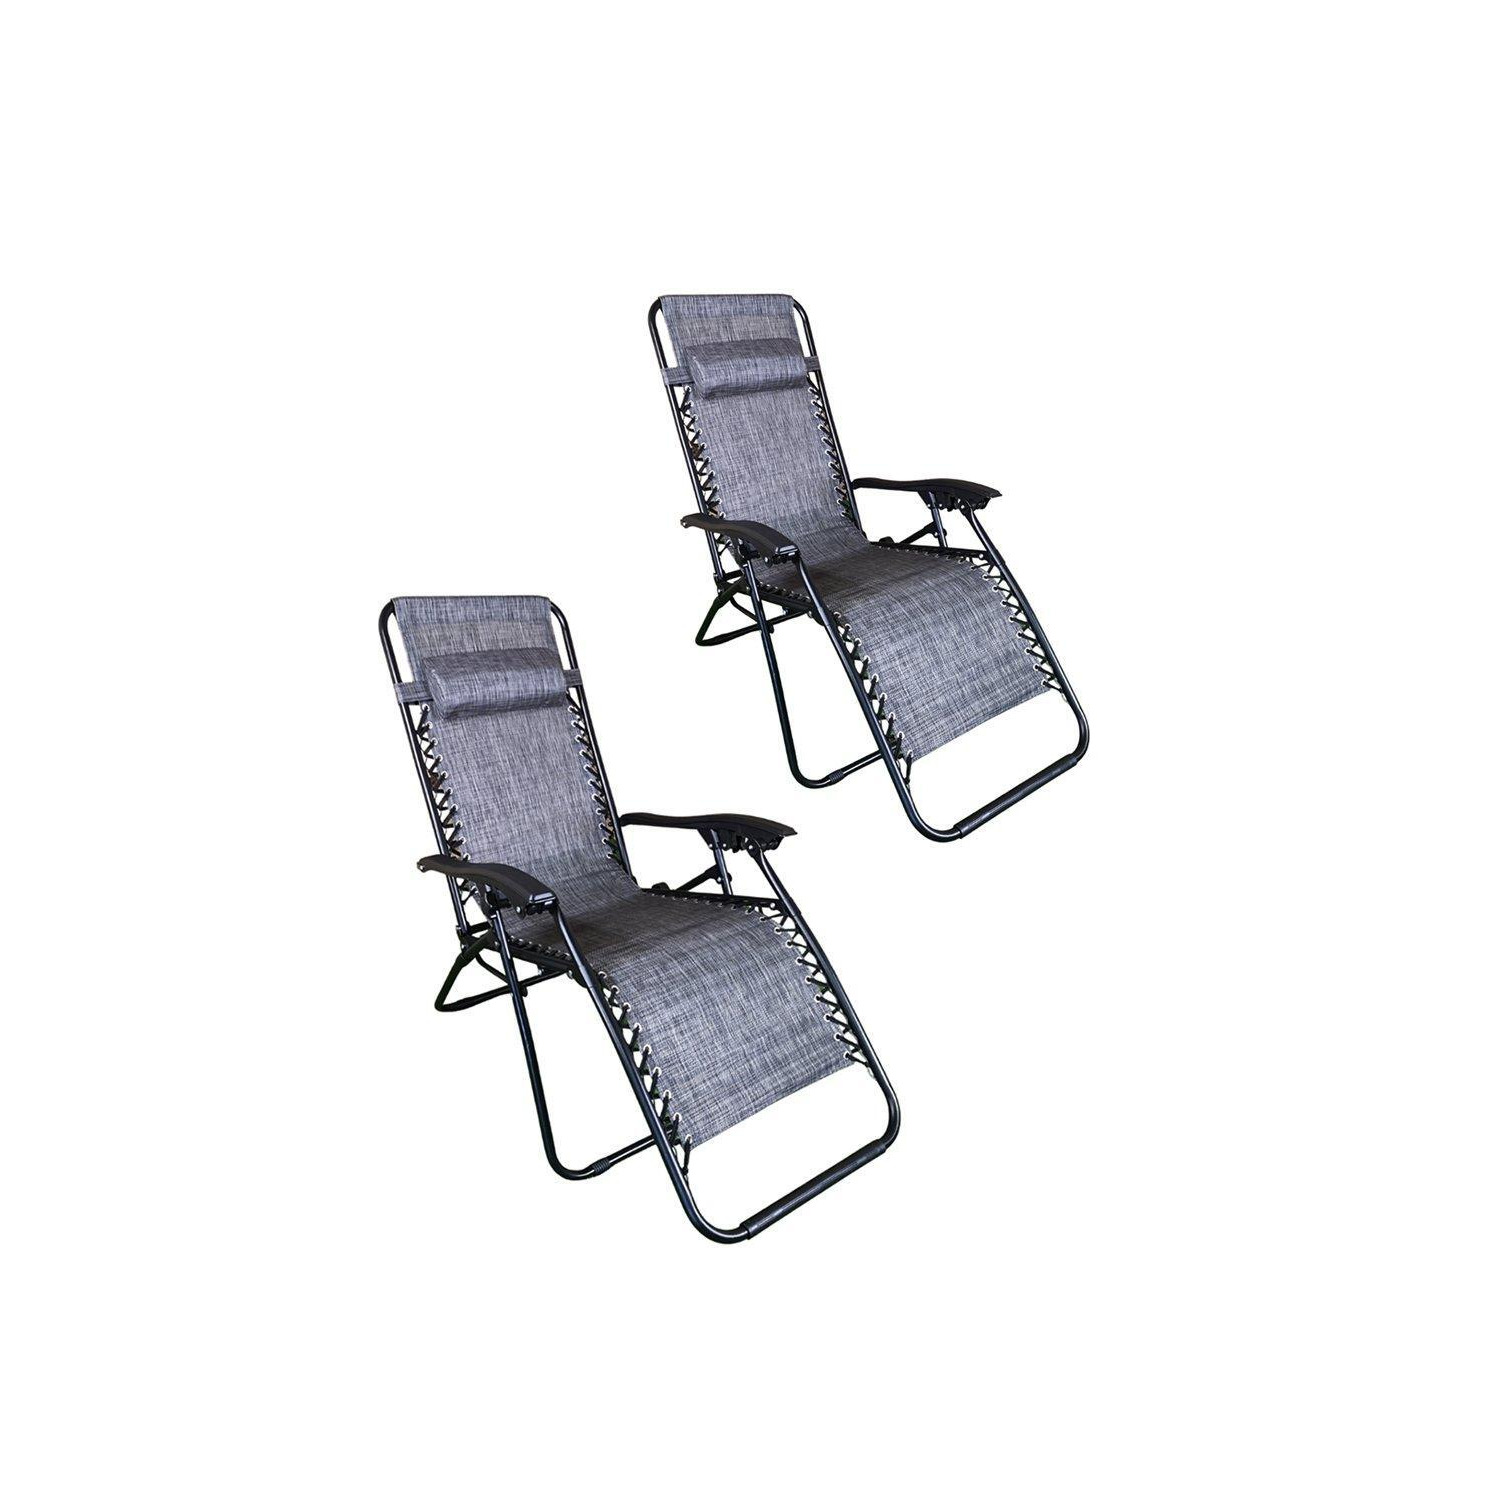 Multi Postition Textoline Garden Relaxer Chair Lounger In Grey, Pack of 2 - image 1